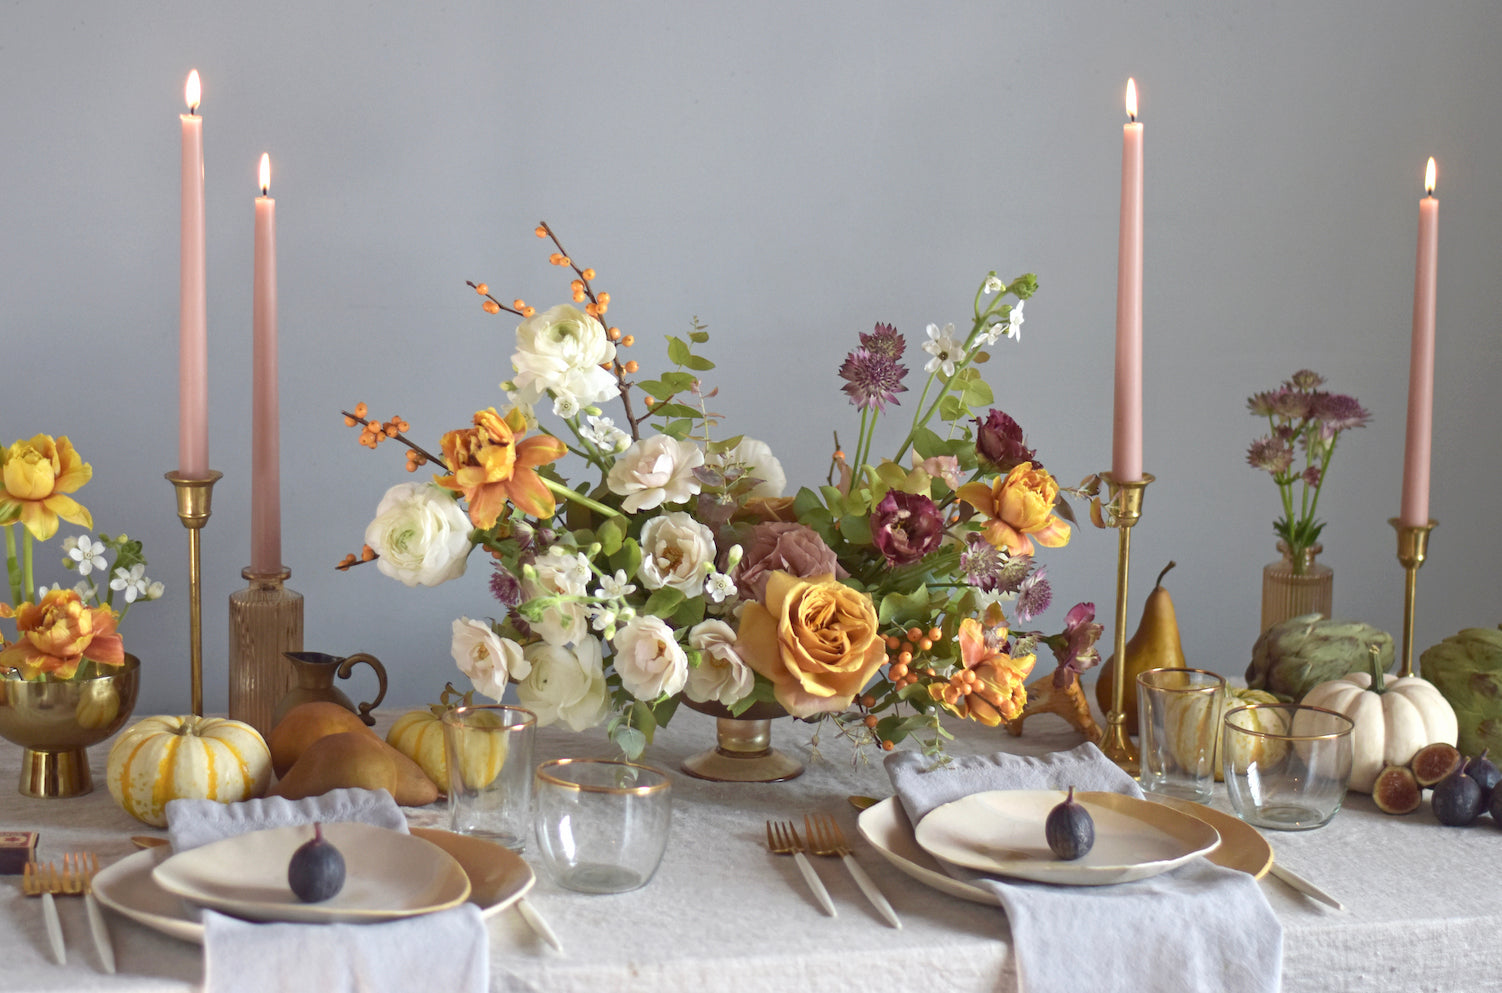 tablesetting tips with pink candles in brass candlesticks, white pumpkins, ceramic plates, and organic floral arrangements